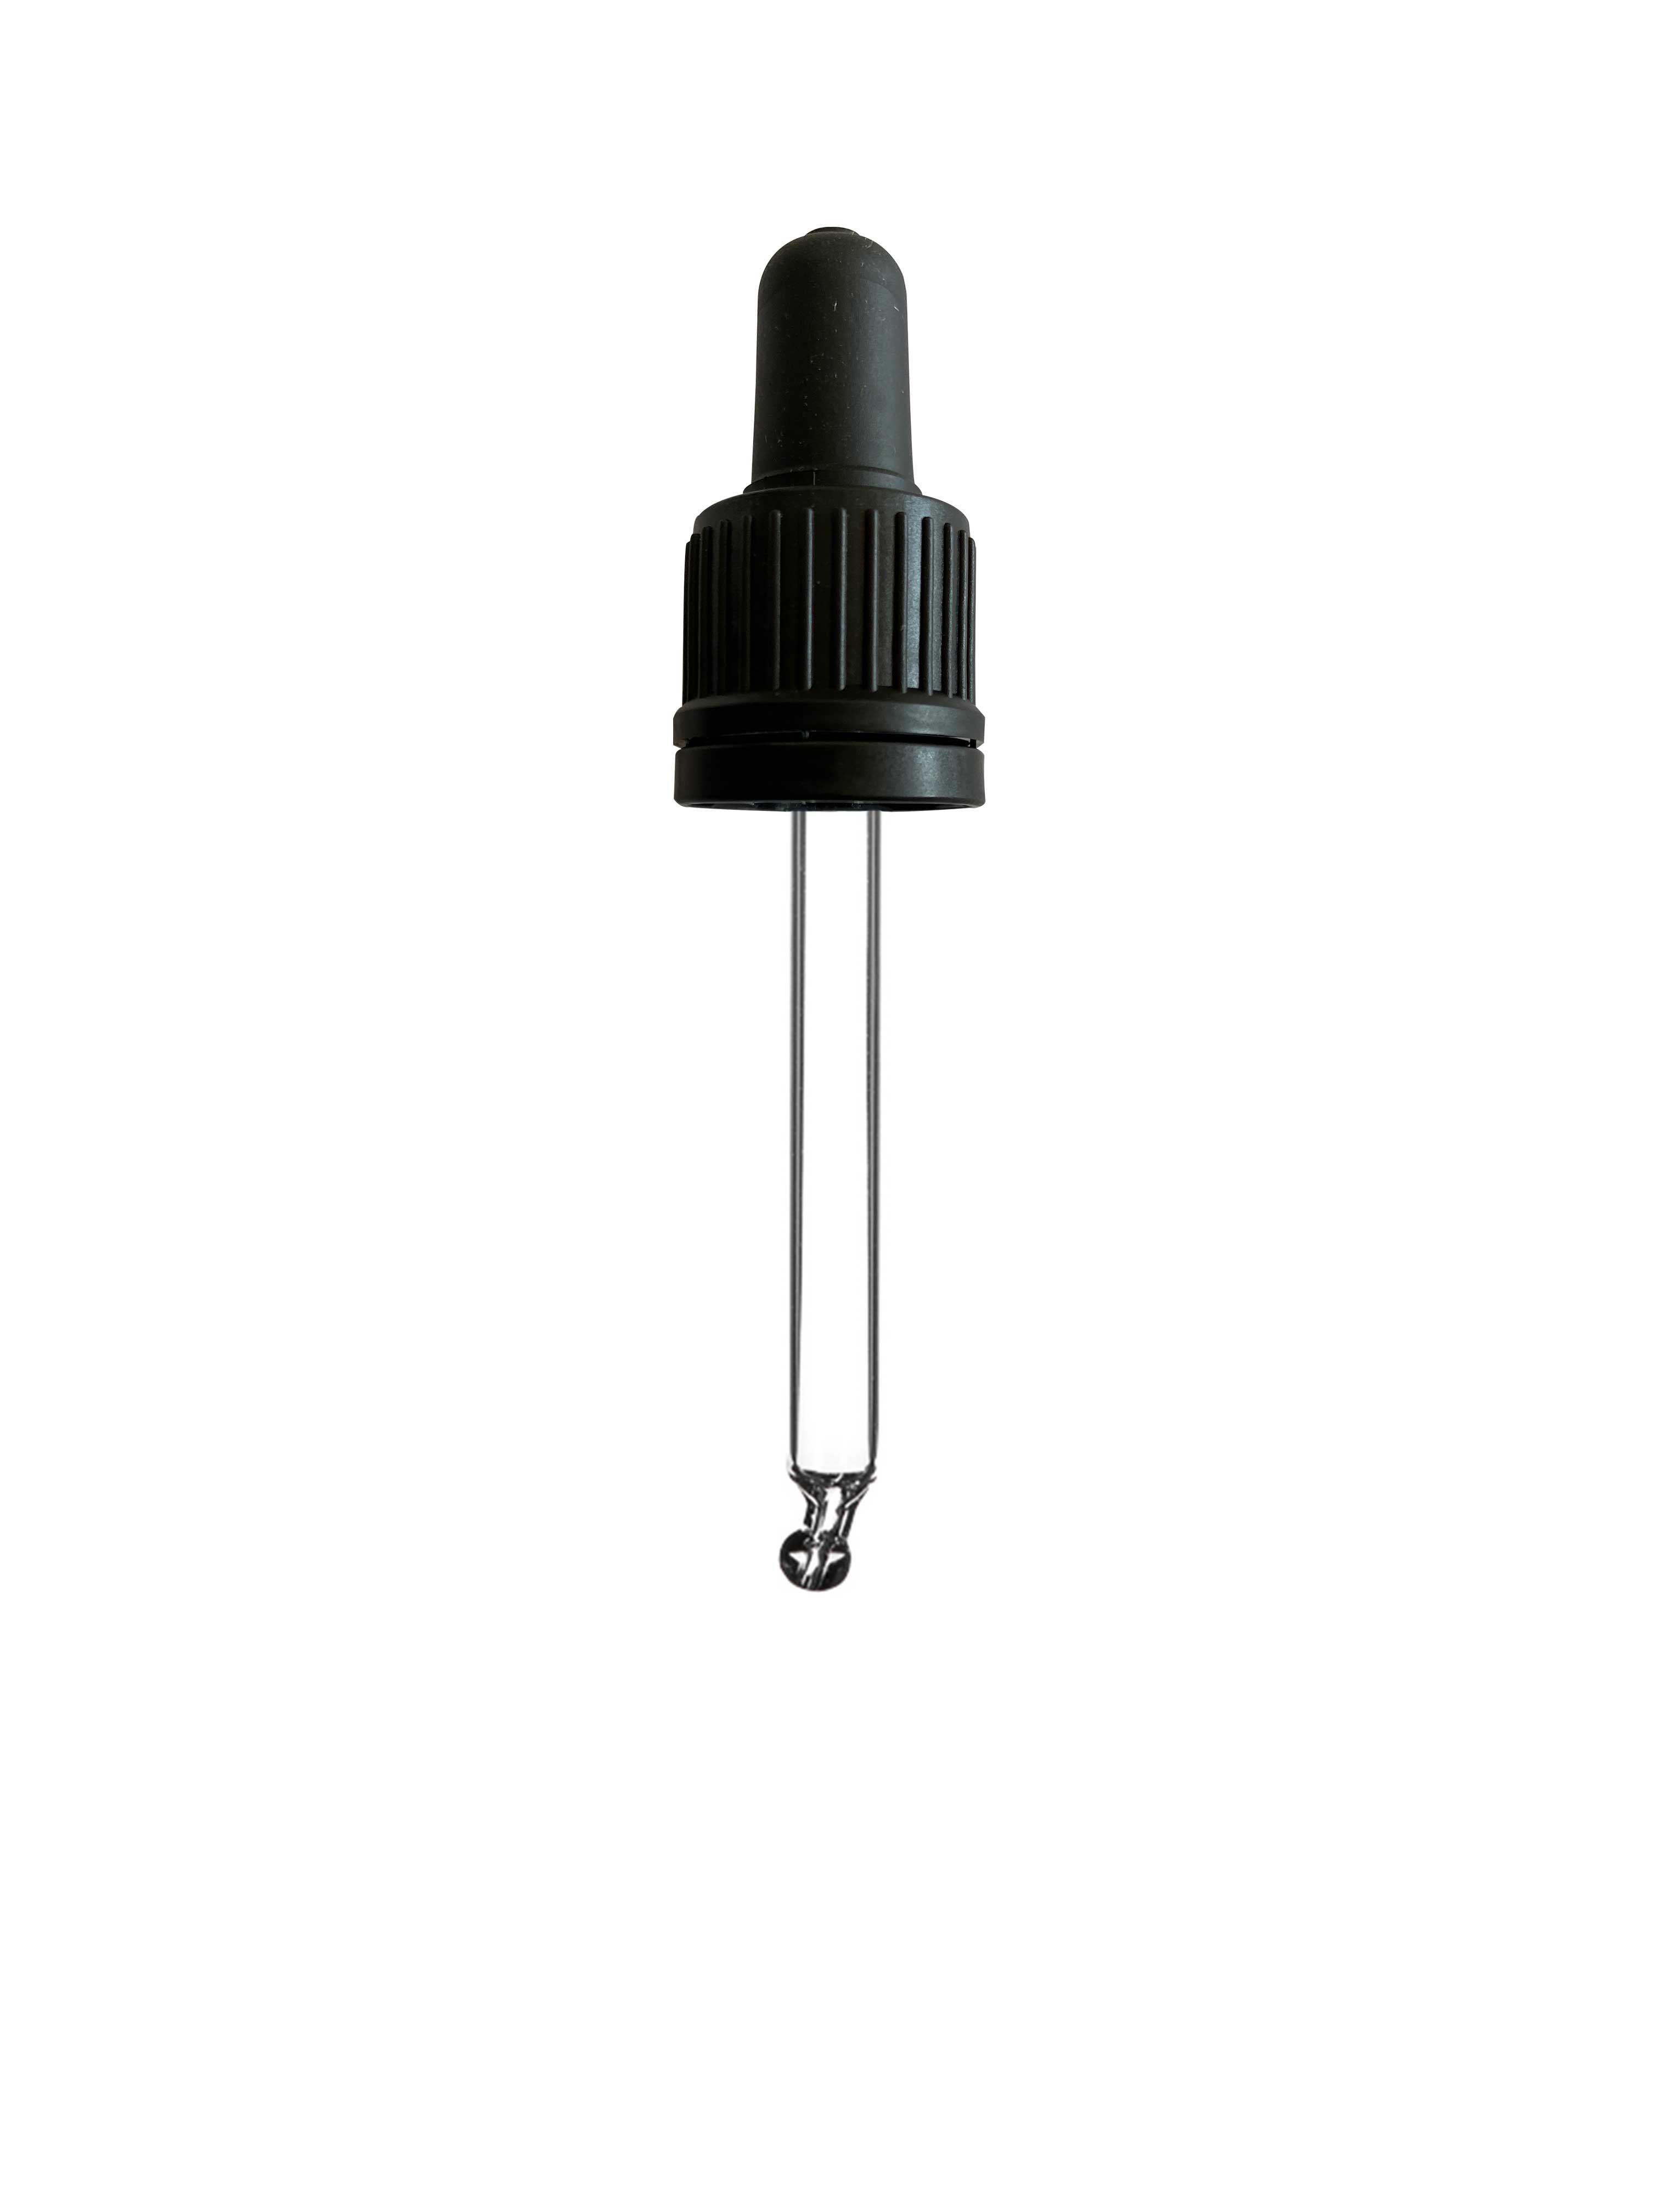 Pipette series II, DIN18, tamper-evident, PP, black, ribbed, black bulb TPE 0.7 ml, bent ball tip with 1.0 opening for Ginger 30 ml